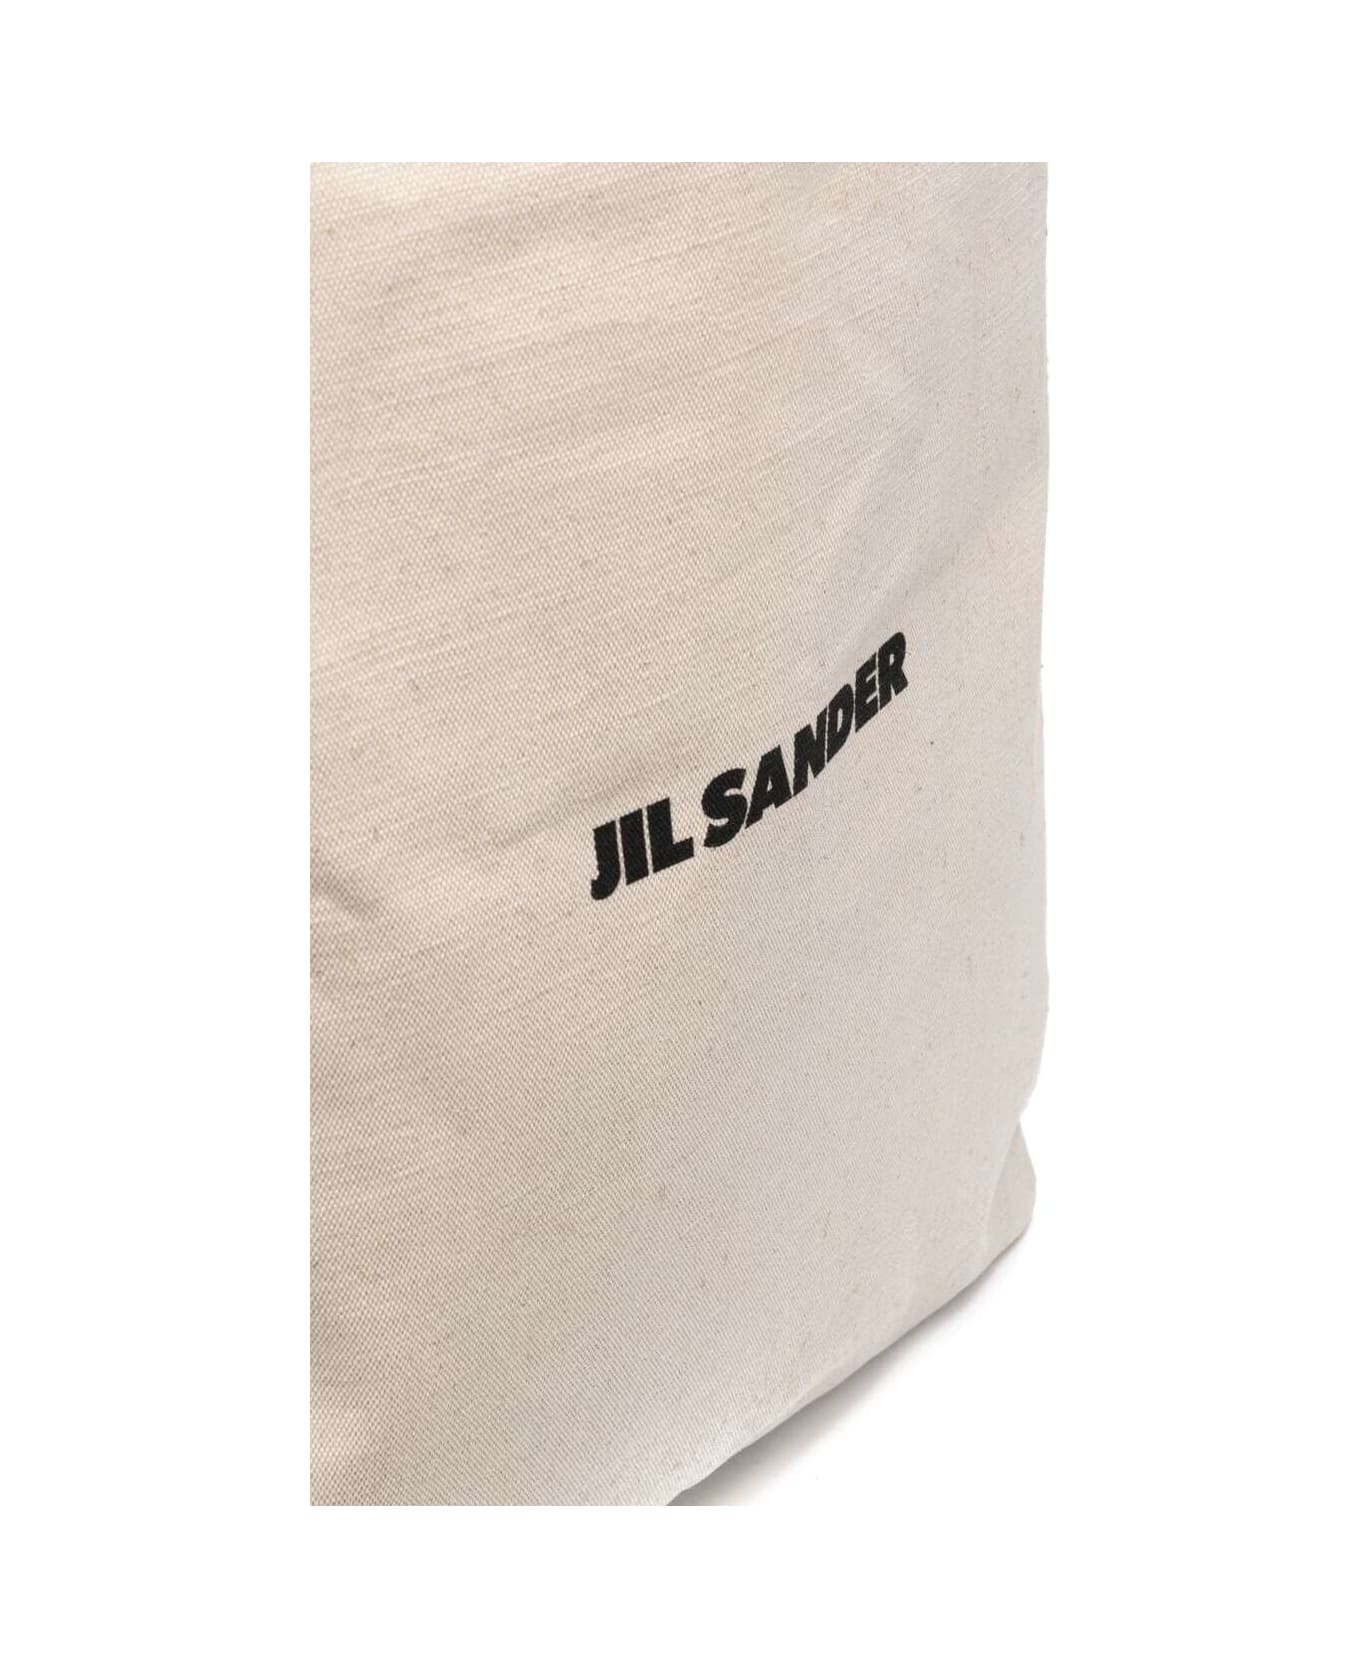 Jil Sander White Tote Bag With Logo Print In Canvas Woman - Beige トートバッグ